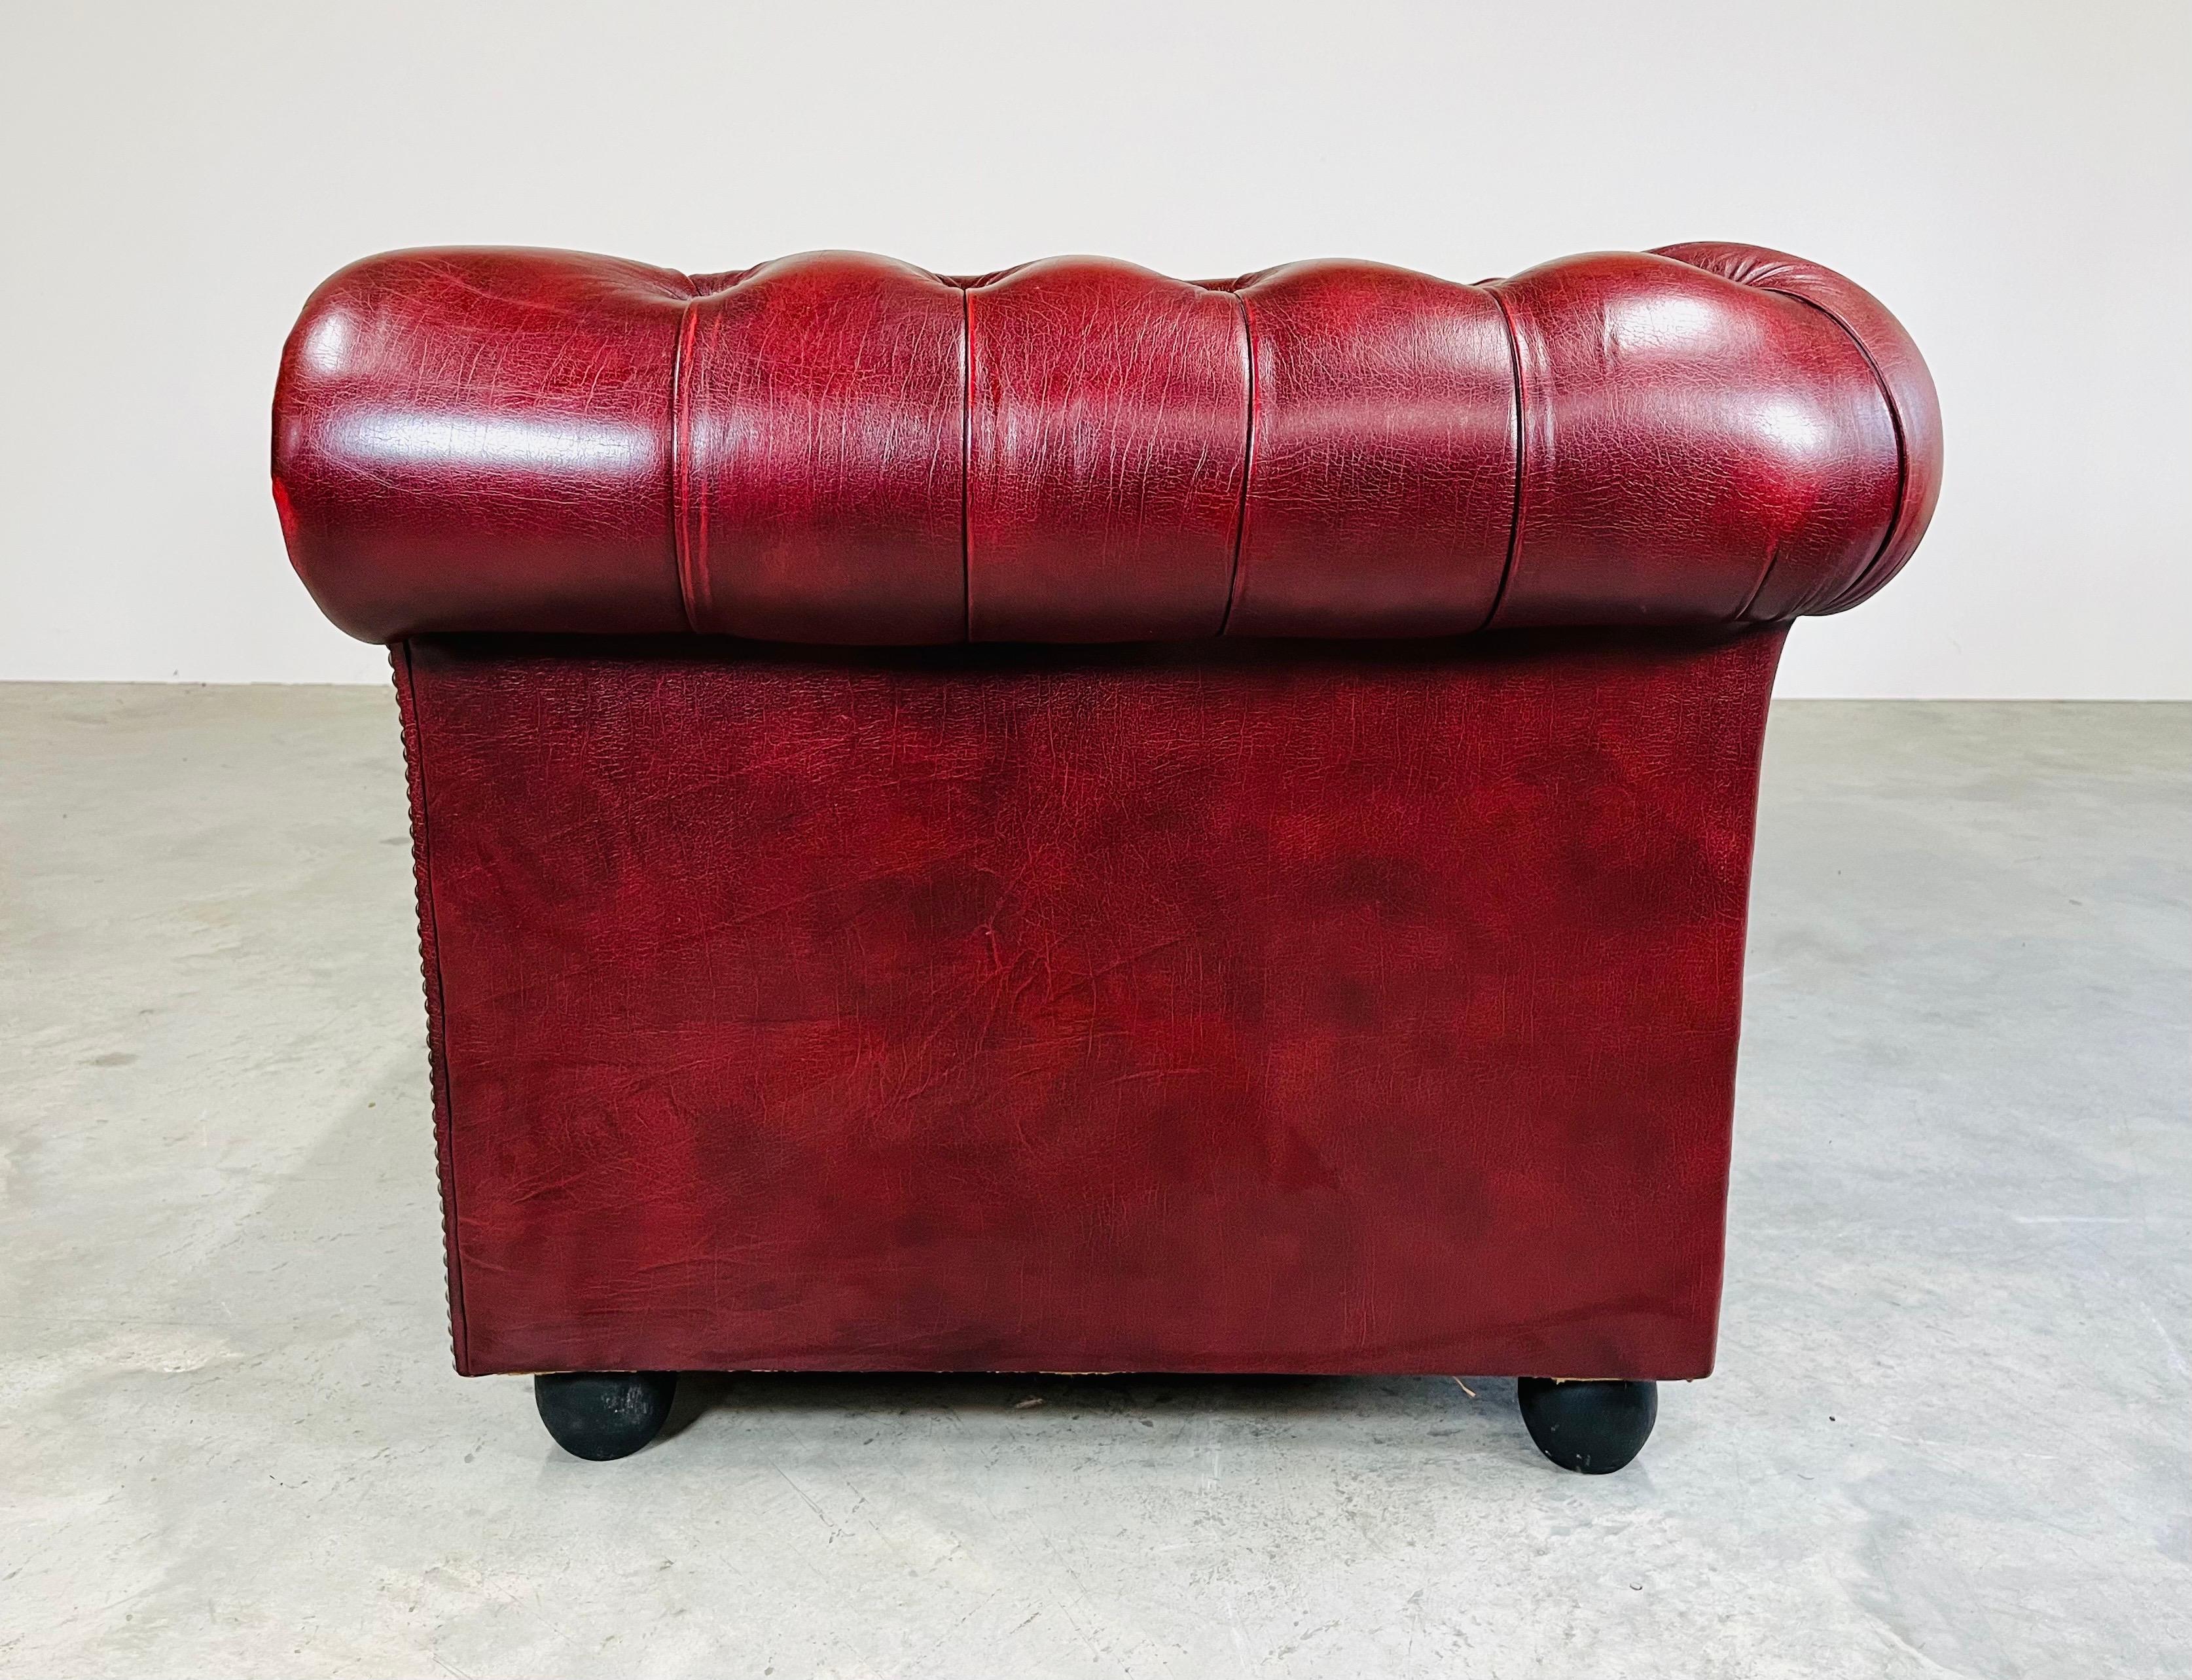 Oxblood Chesterfield Tufted Leather Love Seat Sofa -Great Britain Circa 1970 2